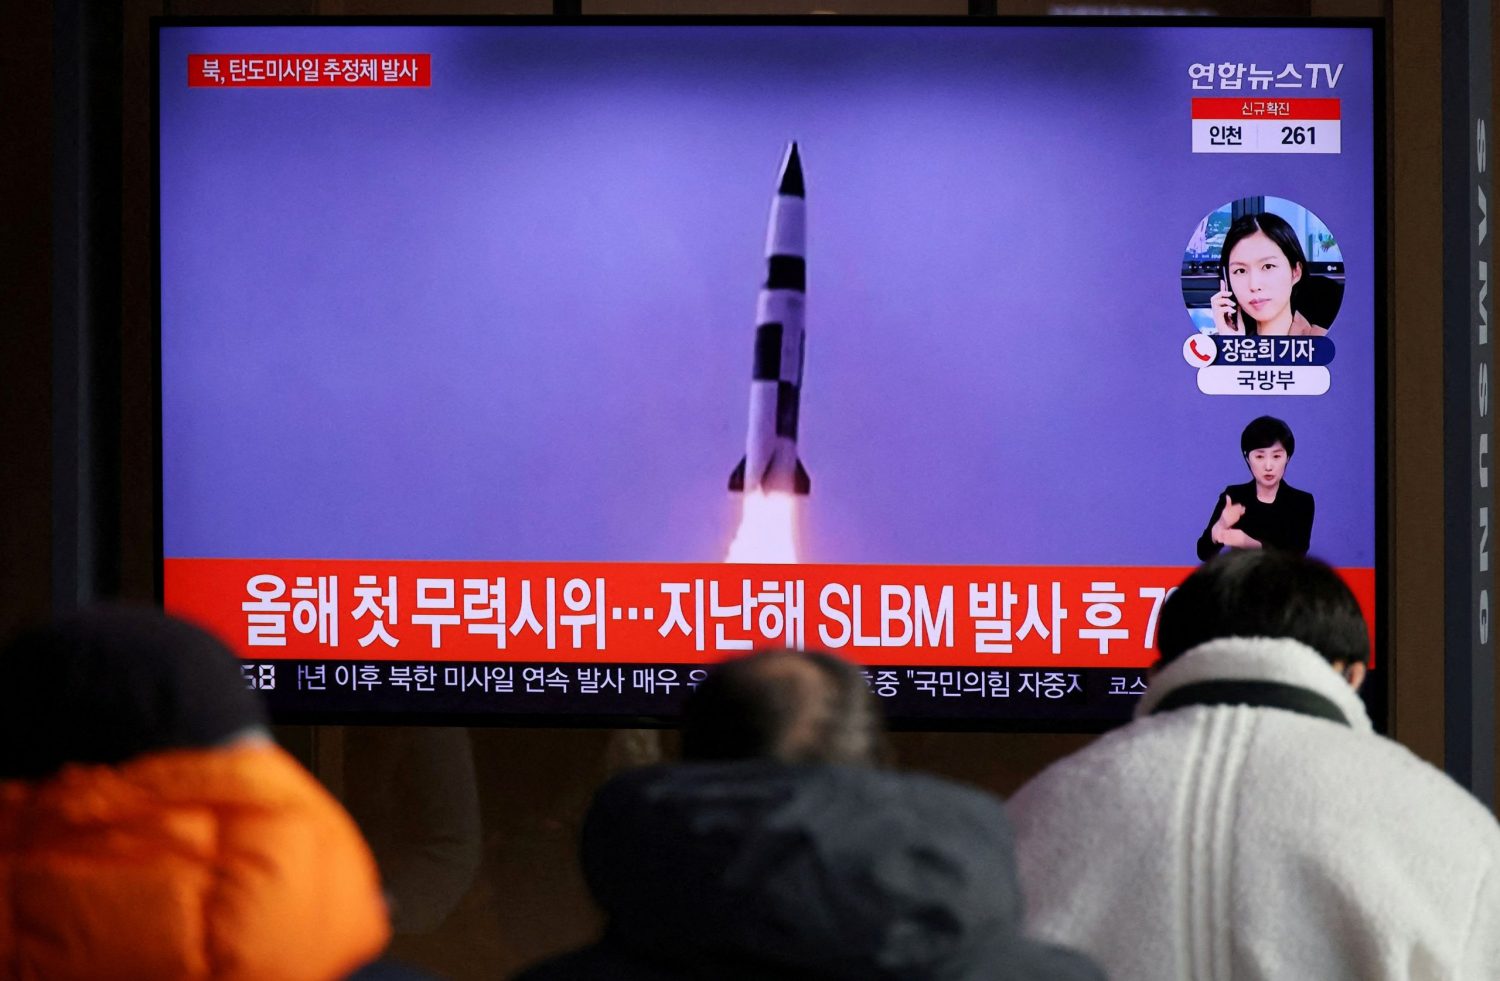 FILE PHOTO: People watch a TV broadcasting file footage of a news report on North Korea firing a ballistic missile off its east coast in Seoul